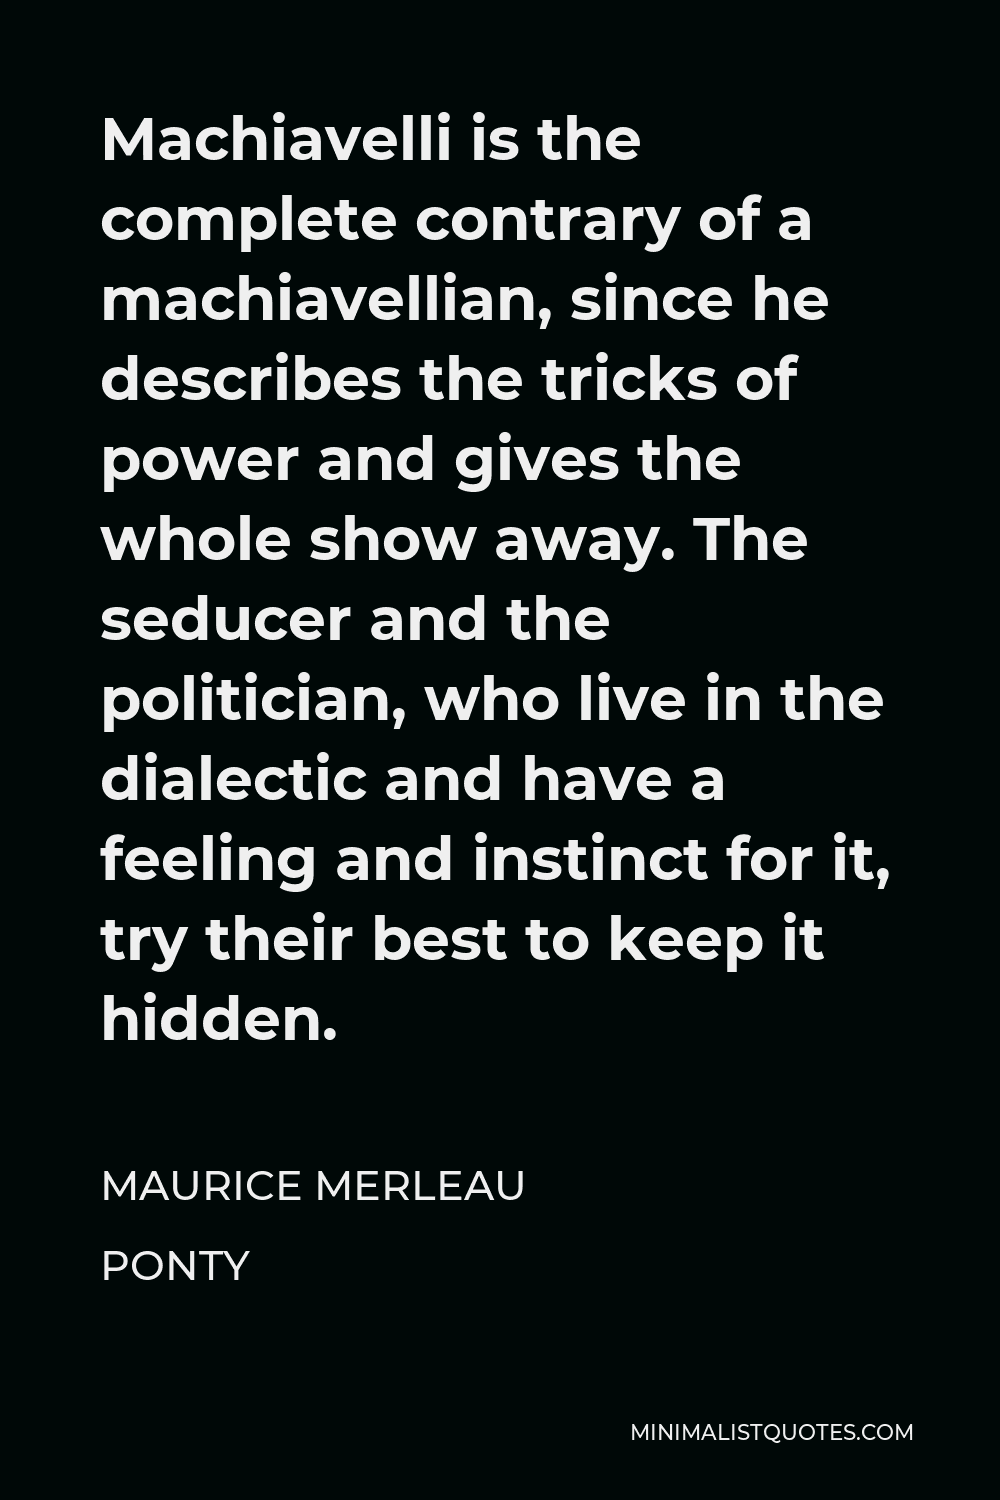 Maurice Merleau Ponty Quote - Machiavelli is the complete contrary of a machiavellian, since he describes the tricks of power and gives the whole show away. The seducer and the politician, who live in the dialectic and have a feeling and instinct for it, try their best to keep it hidden.